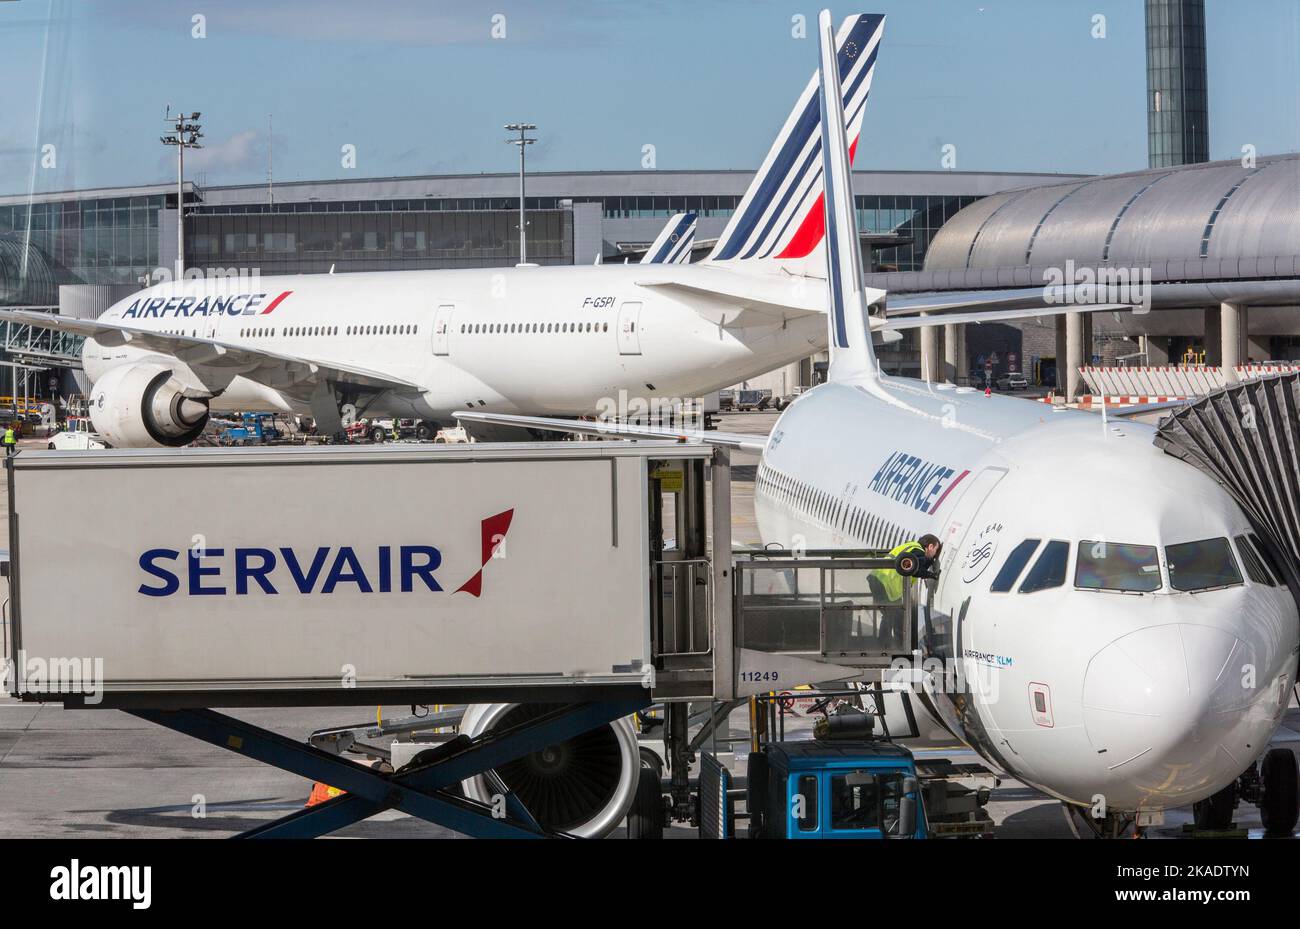 ROISSY CHARLES DE GAULLE AIRPORT AIR FRANCE PLANES Stock Photo